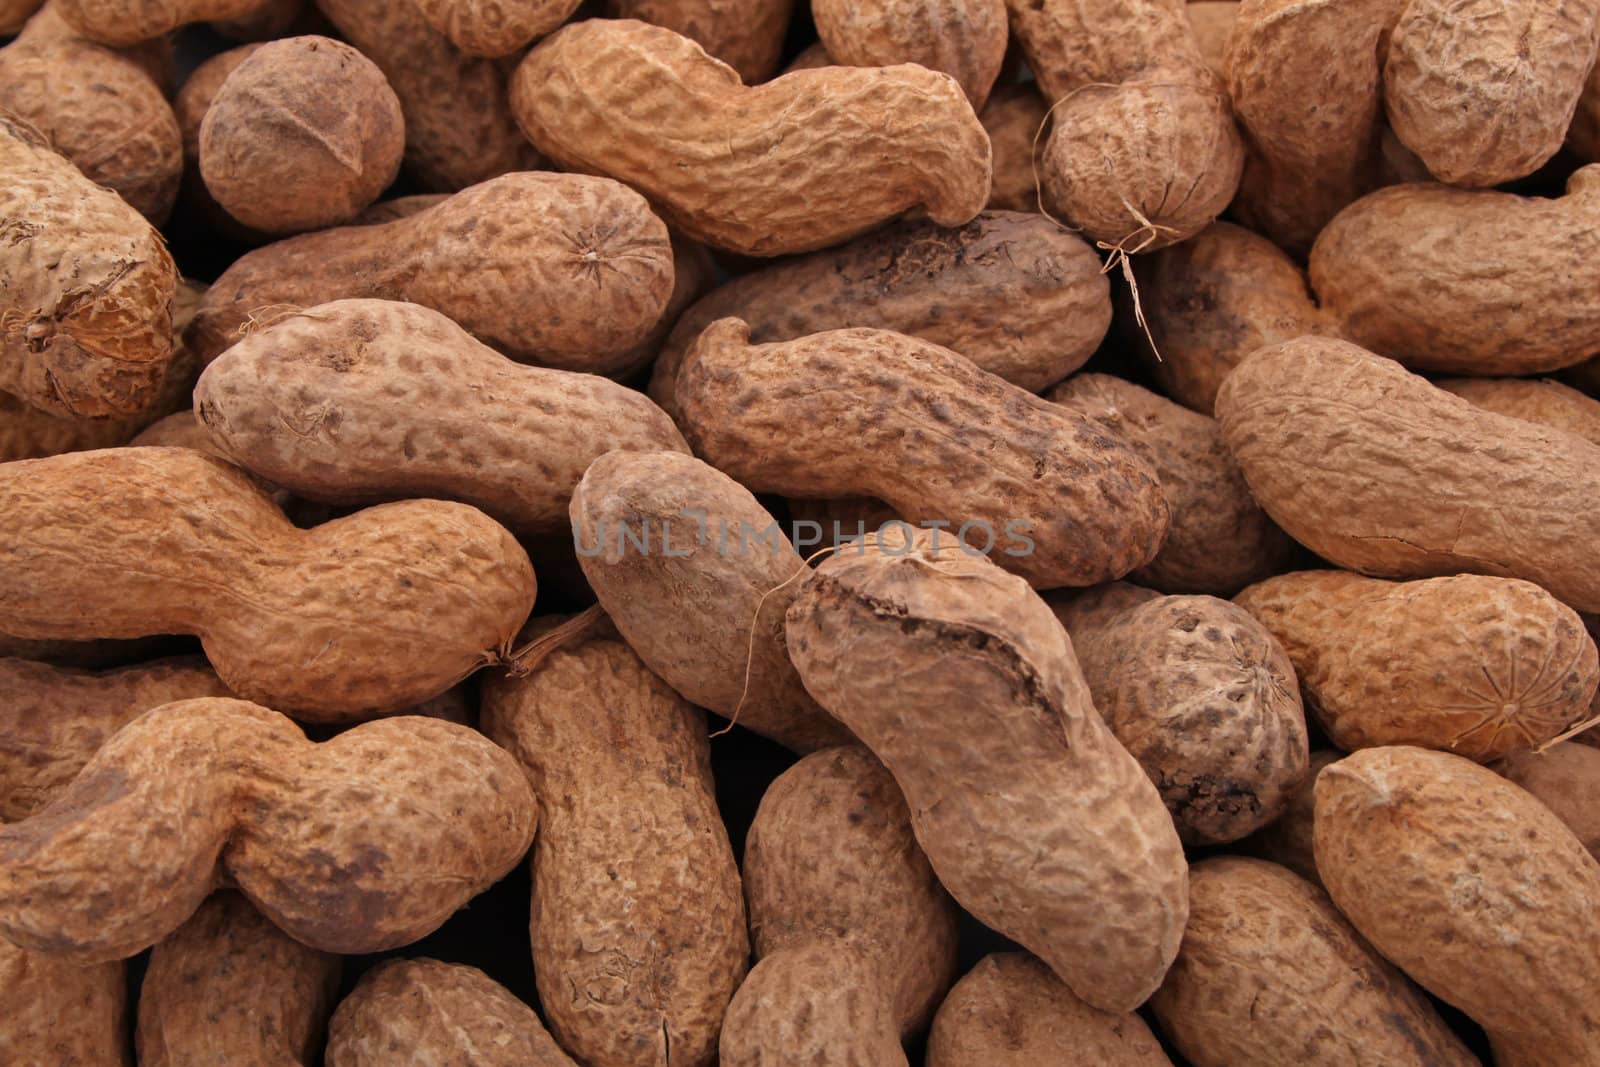 Peanut or groundnut in it's shell ready to eat,